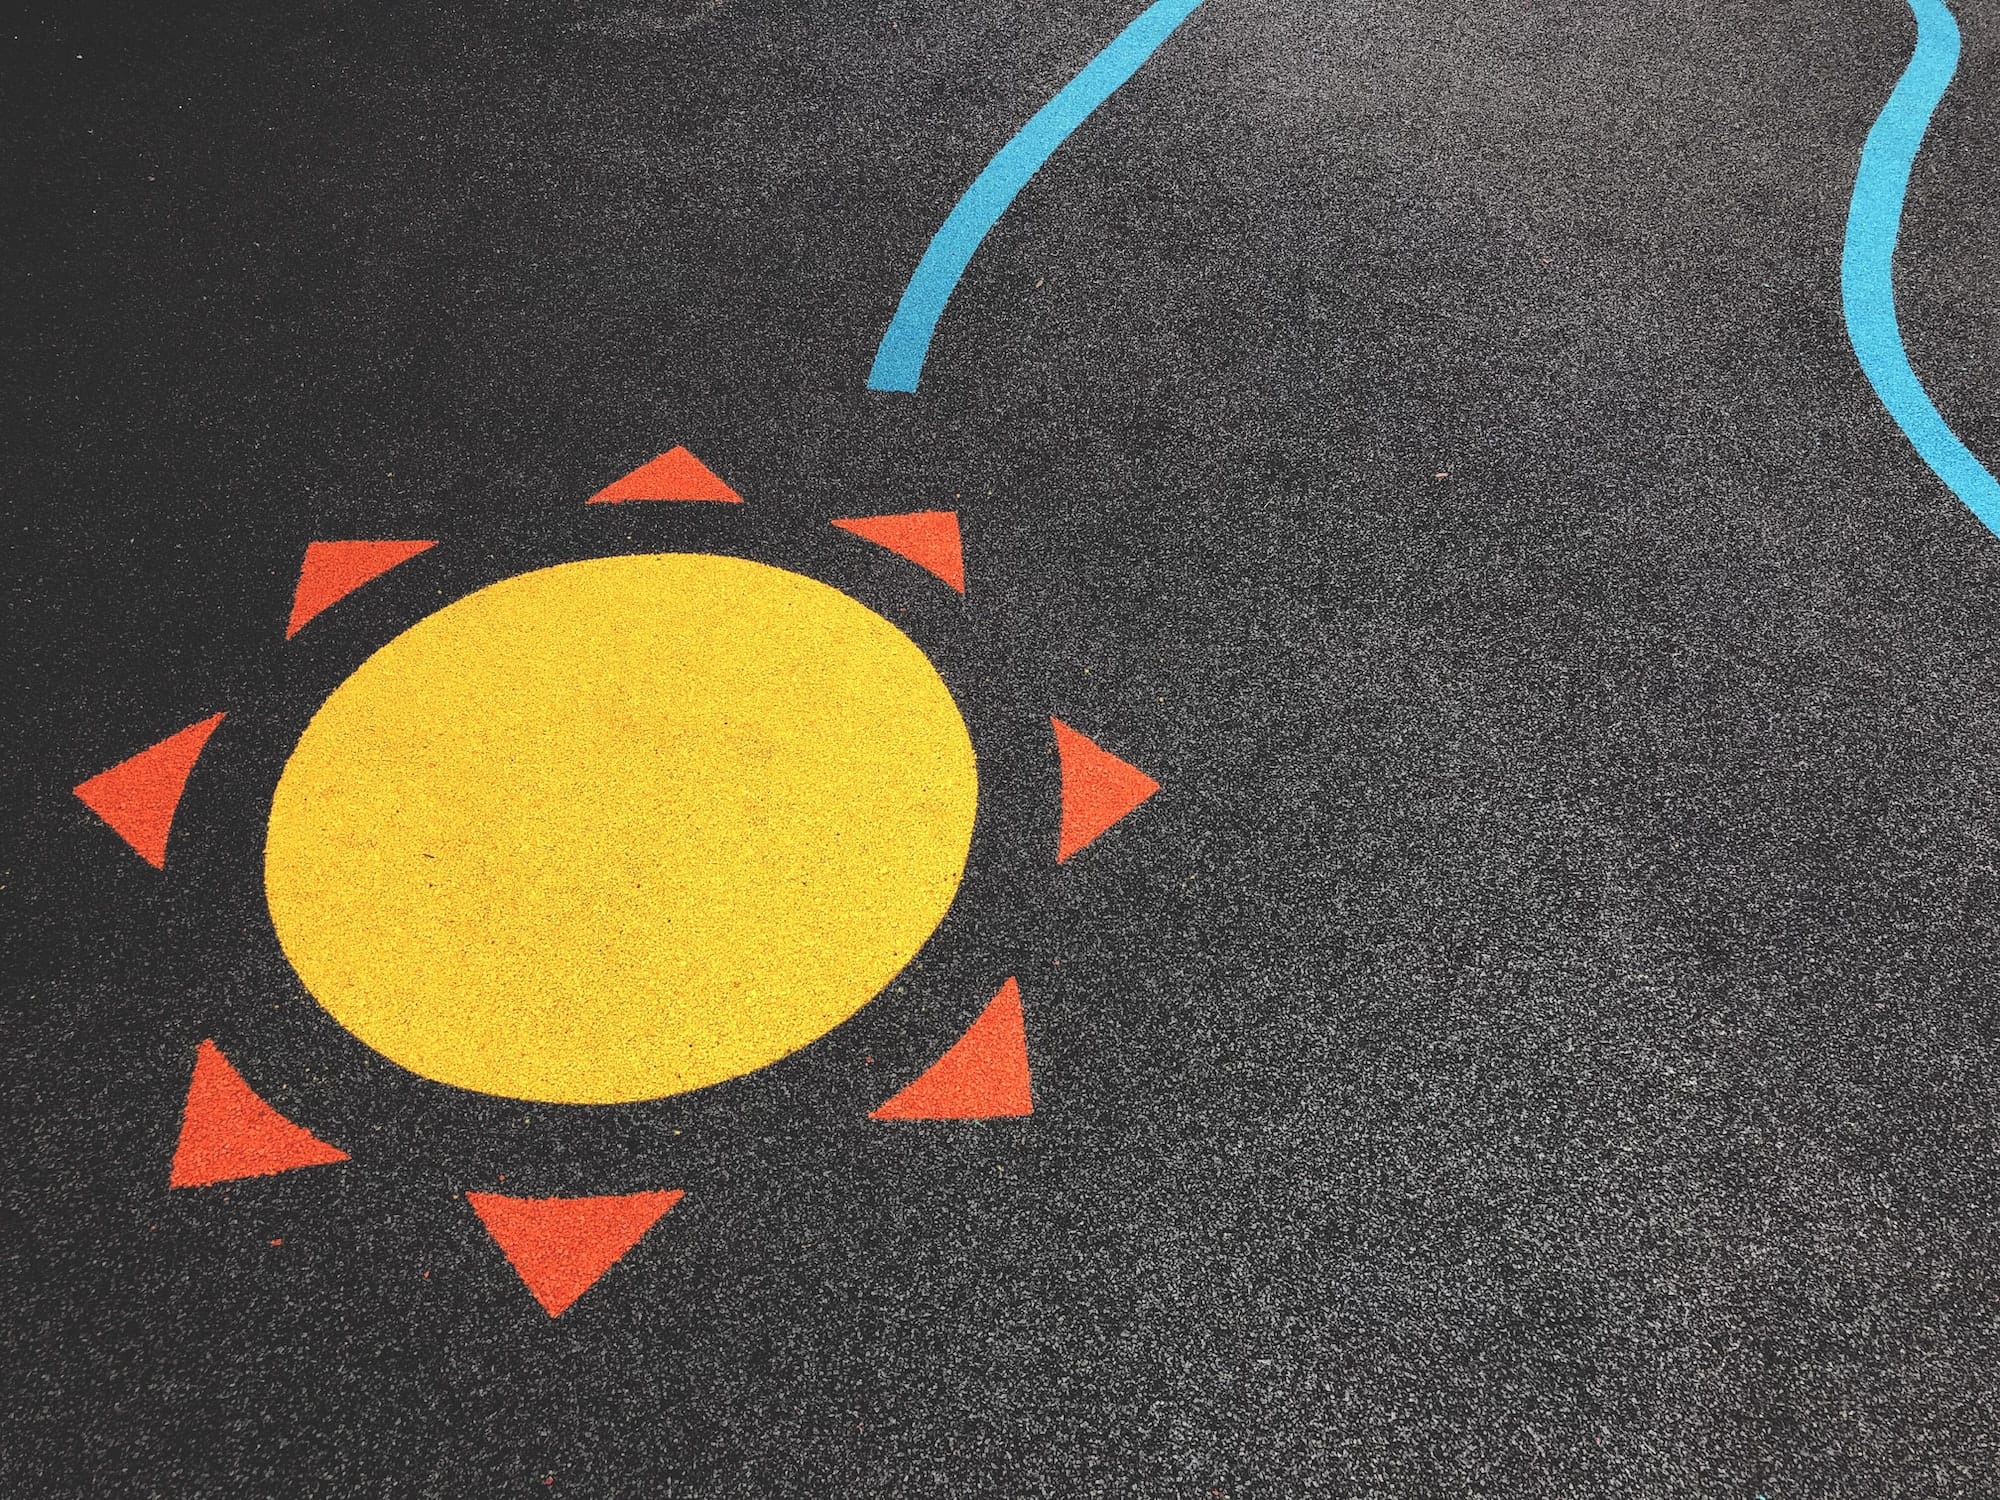 Sunshine painting on kid’s playground with copy space